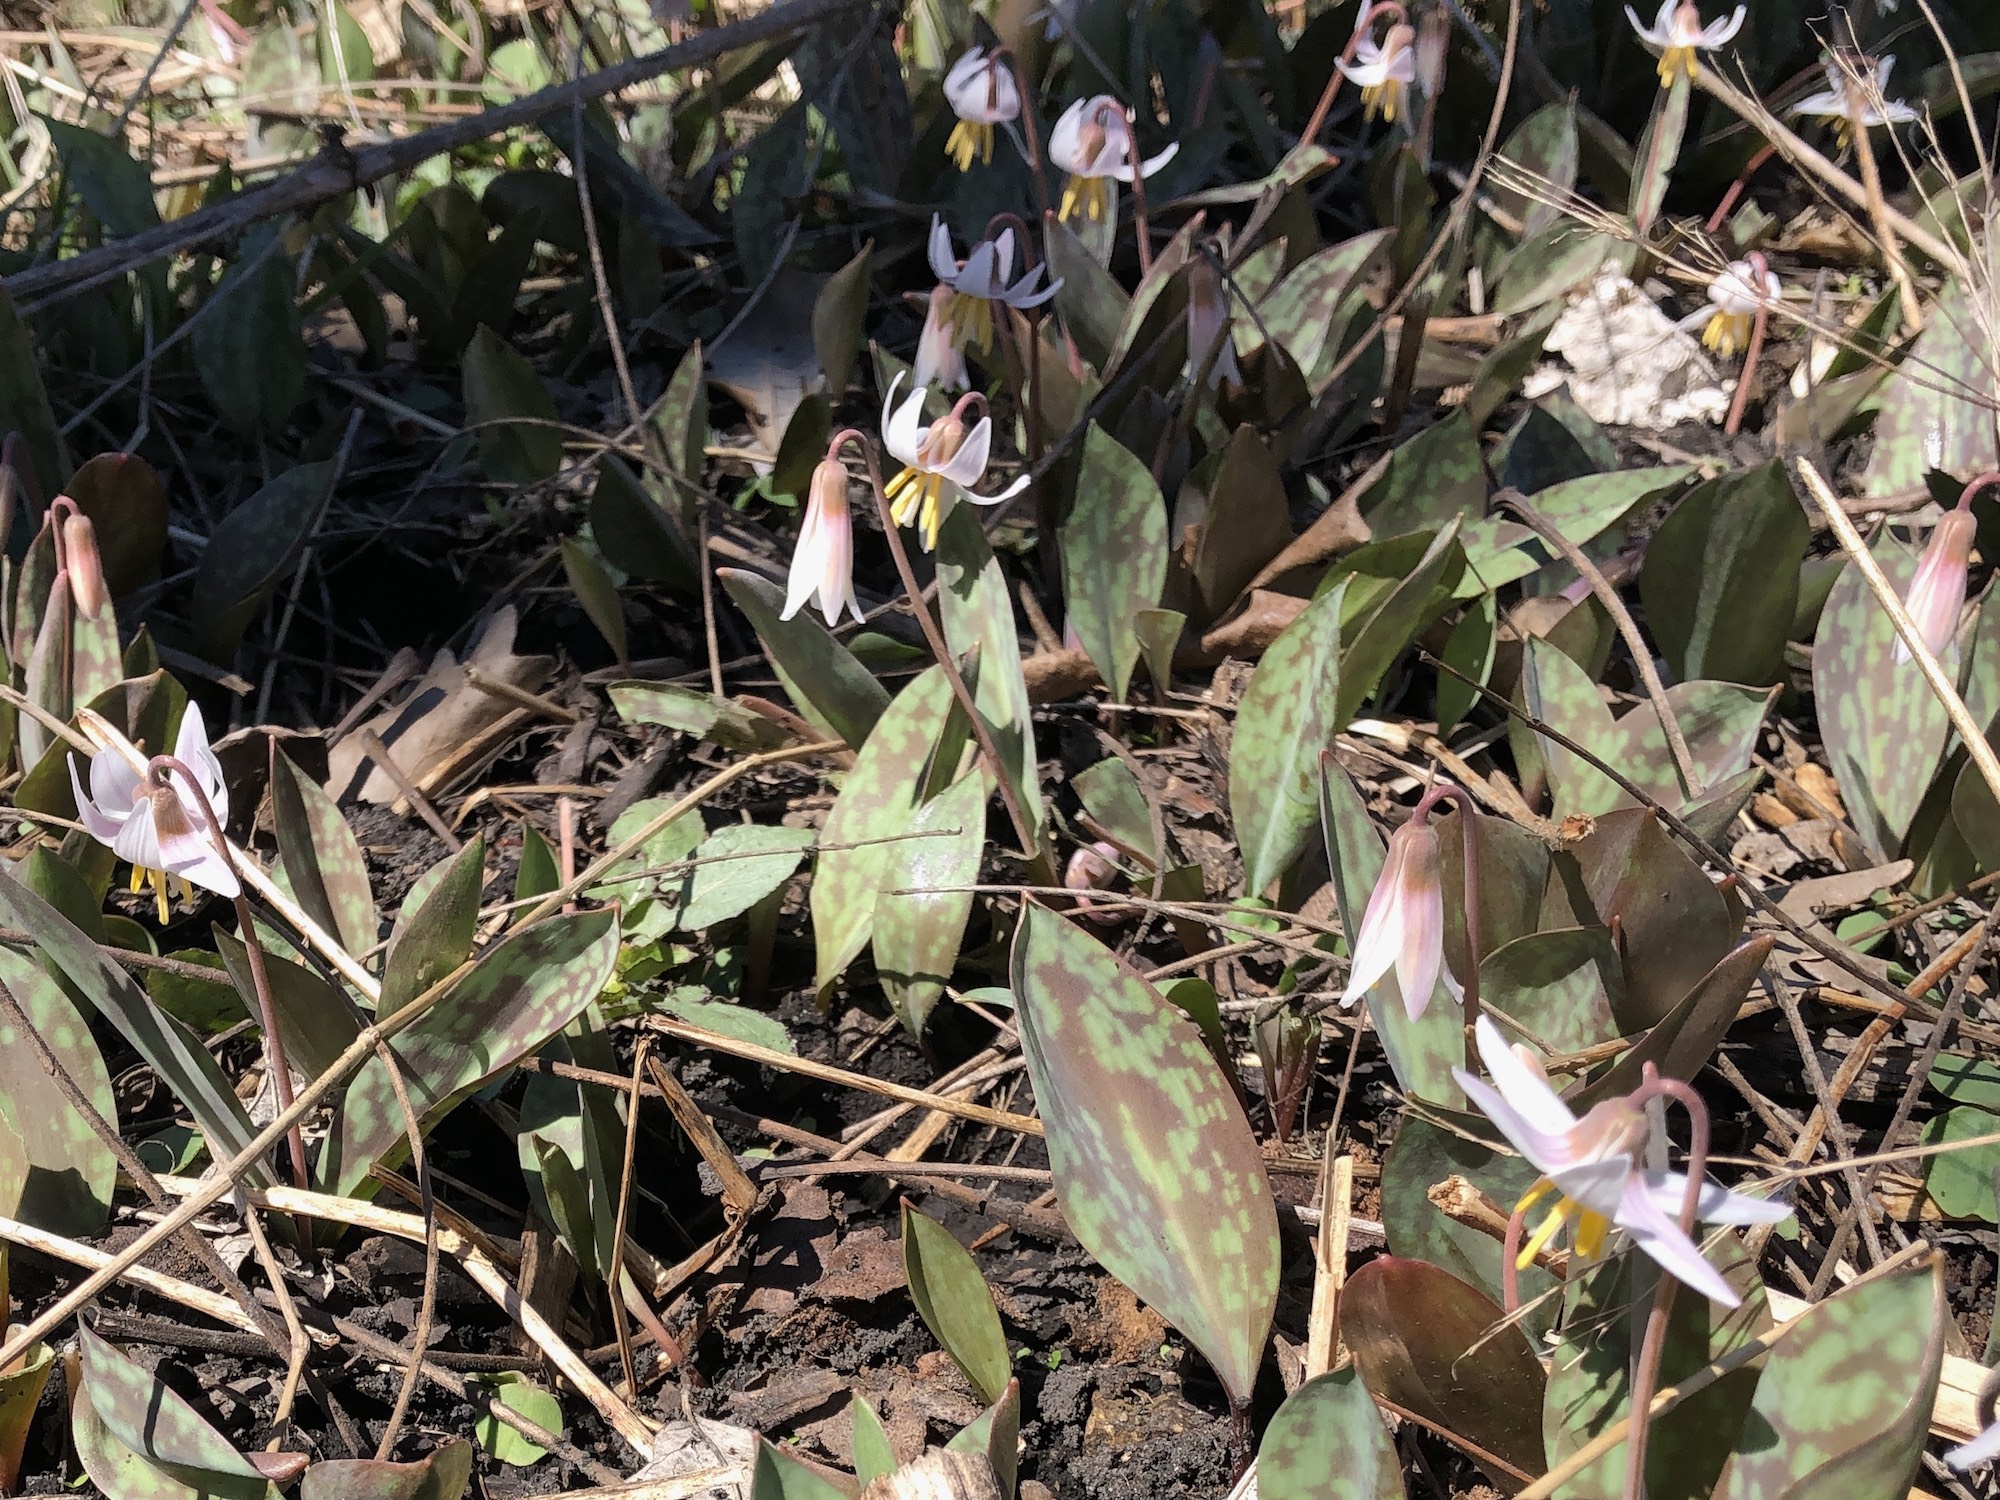 White Trout Lilies on April 19, 2019 near Council Ring.